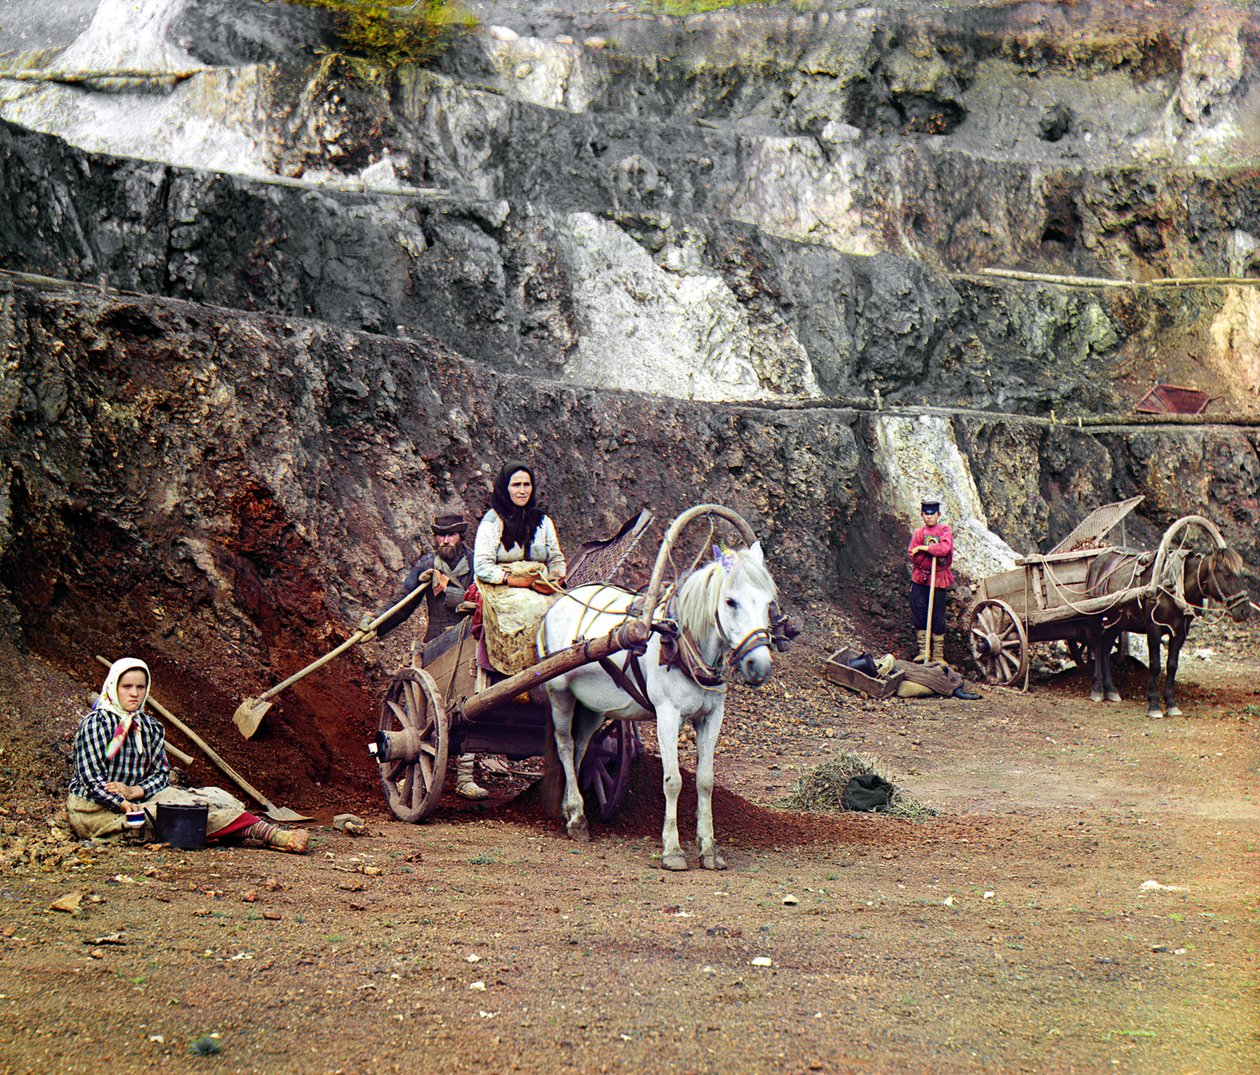 Sergey_Prokudin_Gorsky_-_Work_at_the_Bakalskii_mine_a_family_with_shovels_and_horse-drawn_carts_working_a_-_(MeisterDrucke-187116).jpg